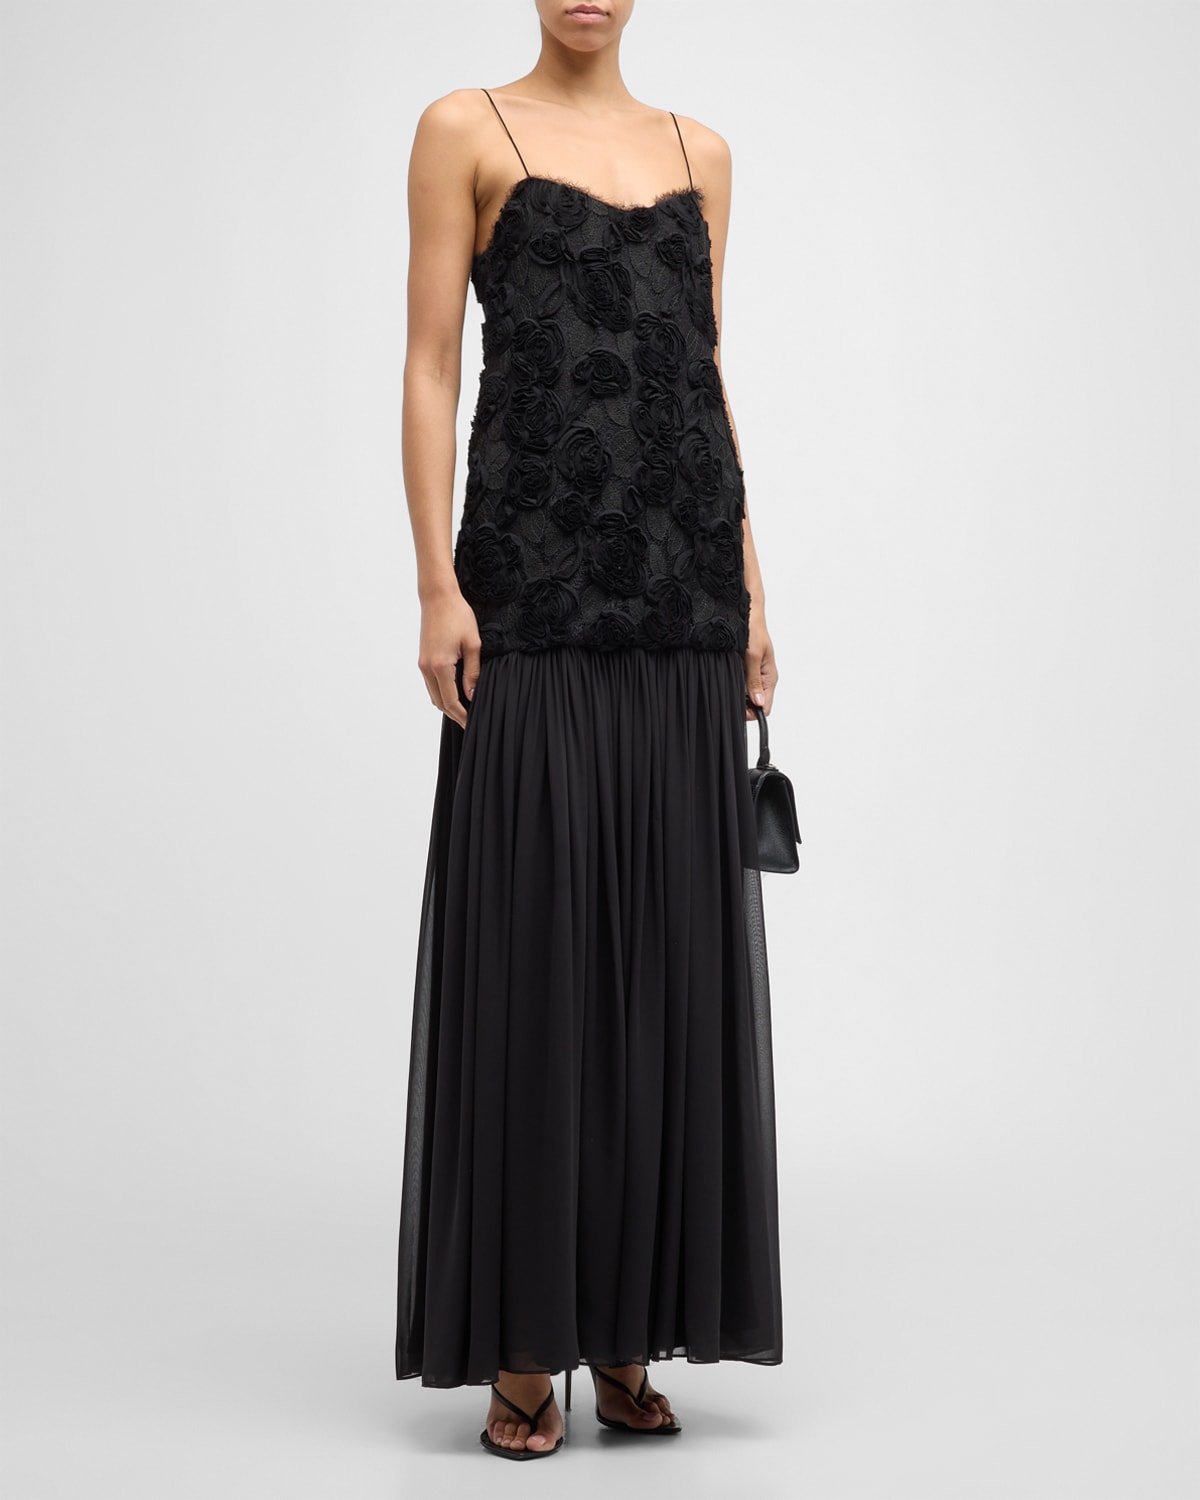 Alexis Natalina Floral Applique Embroidered Maxi Dress In Black